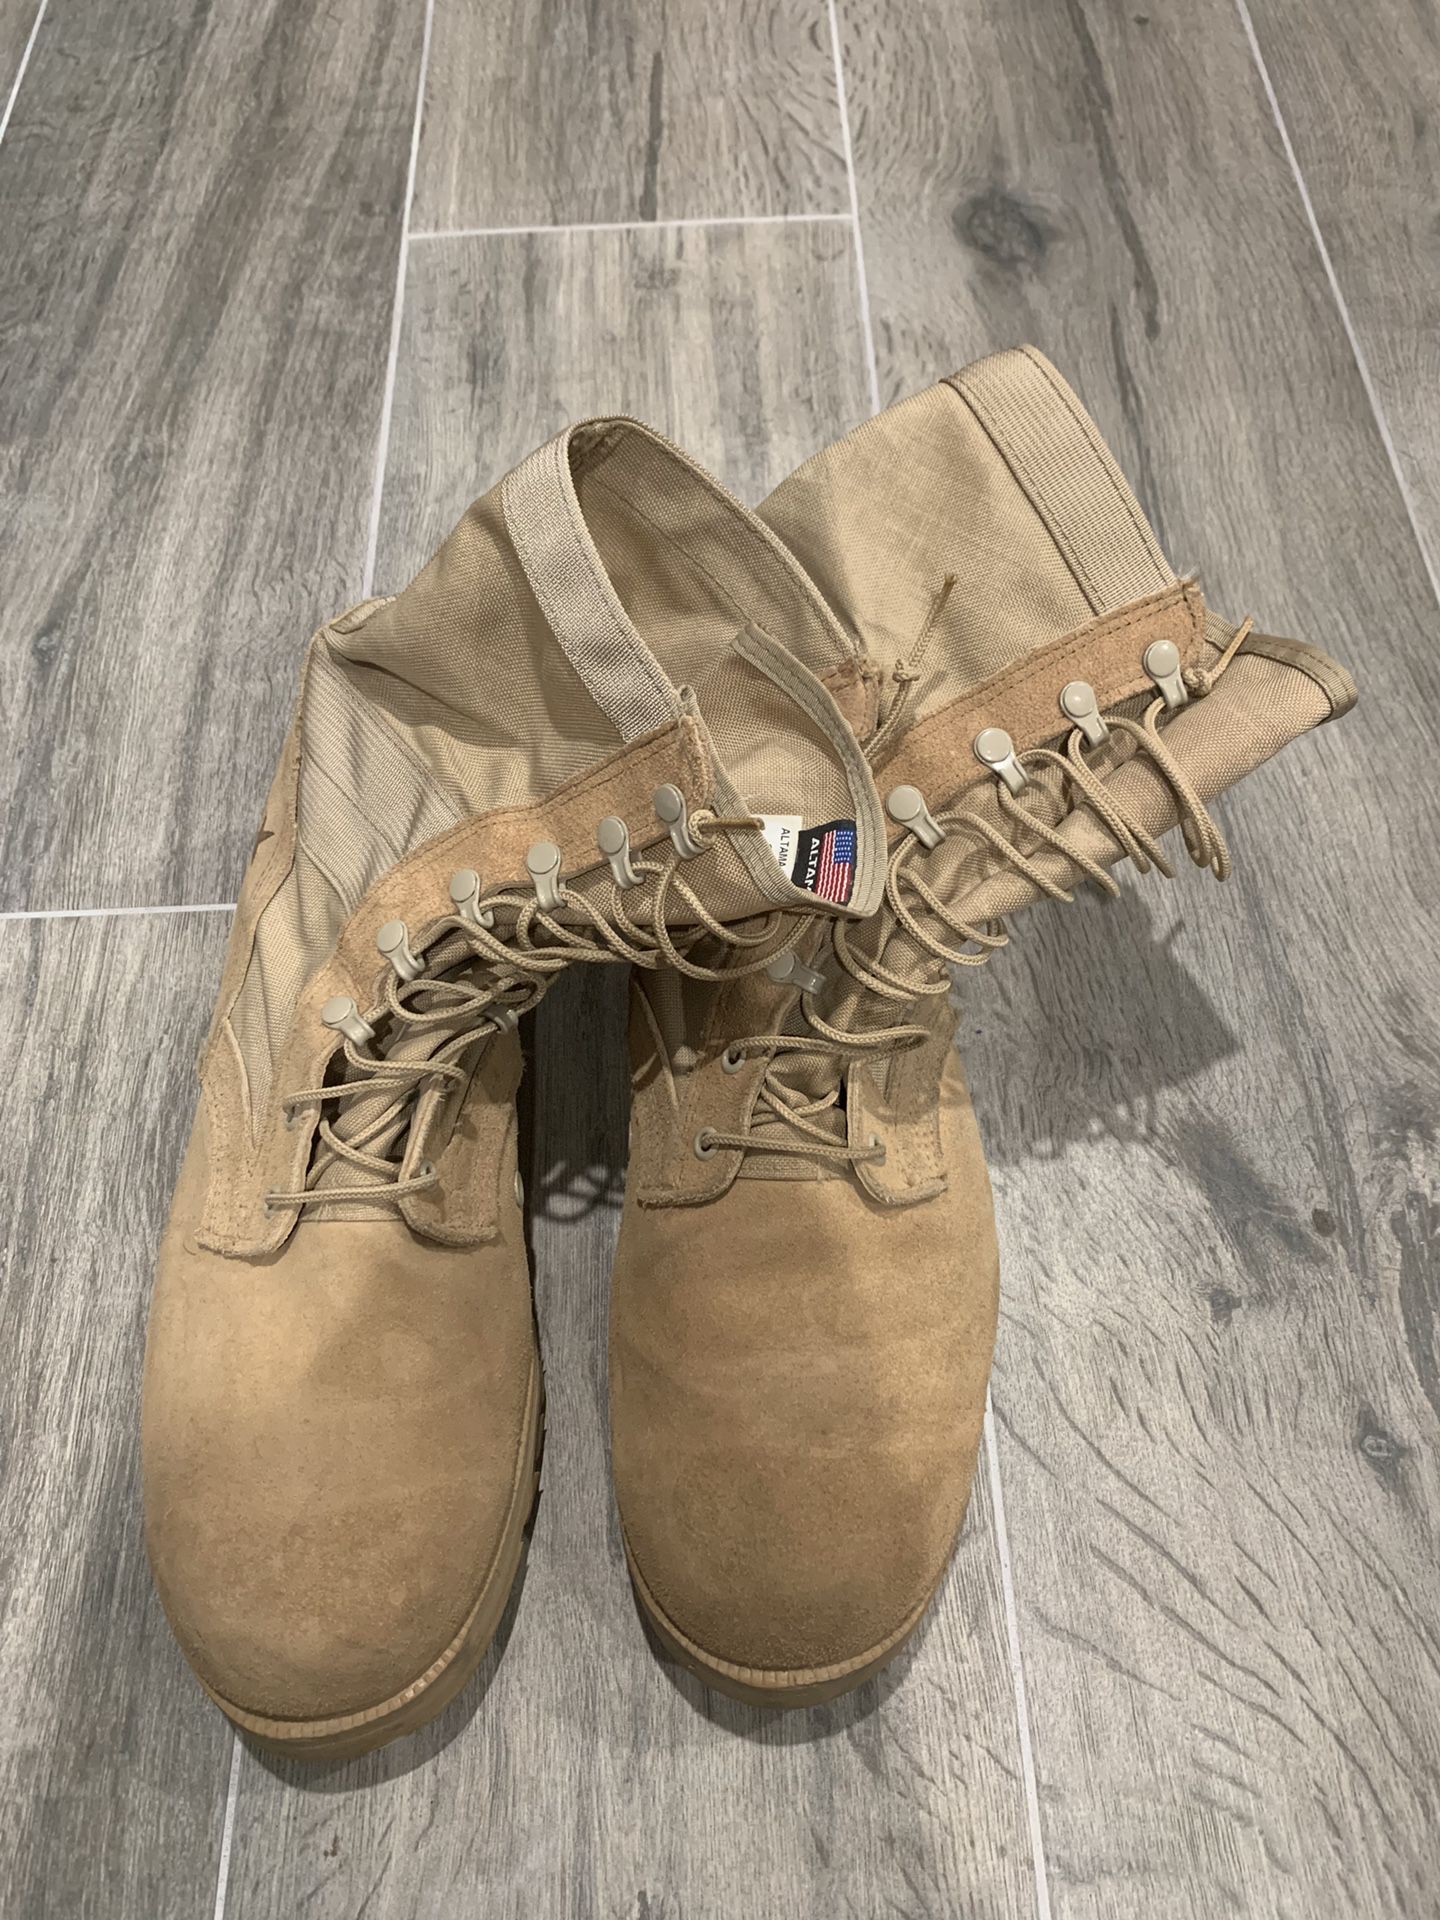 Boot campaign Altama work military boots men size 13 wide